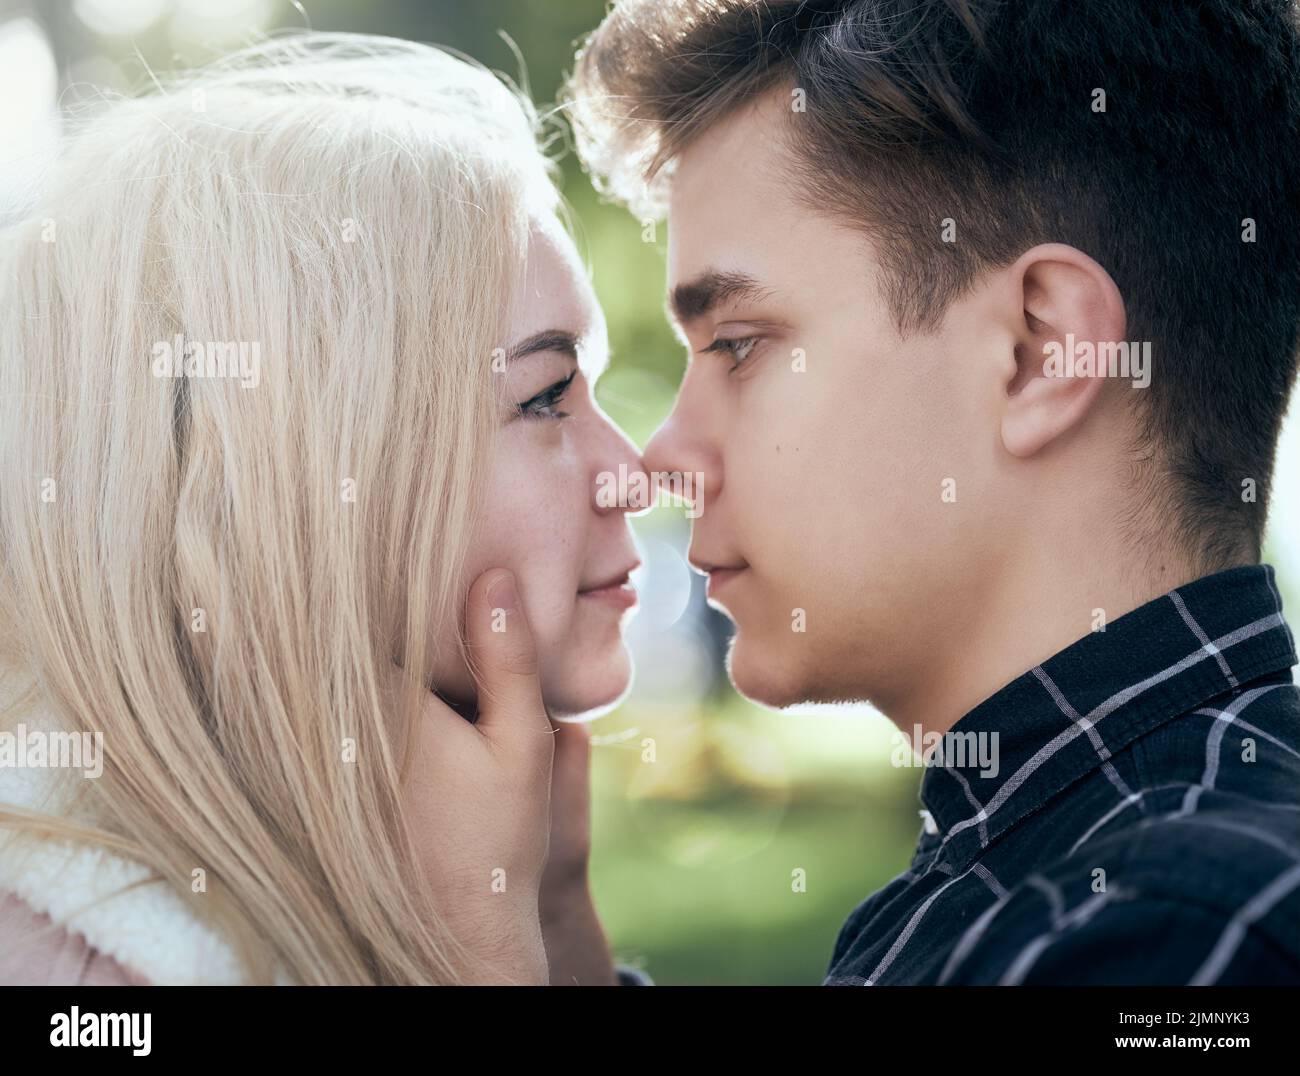 A man affectionately call looks at woman, guy and girl are worth close, touching the tips noses. Concept of teenage love and fir Stock Photo